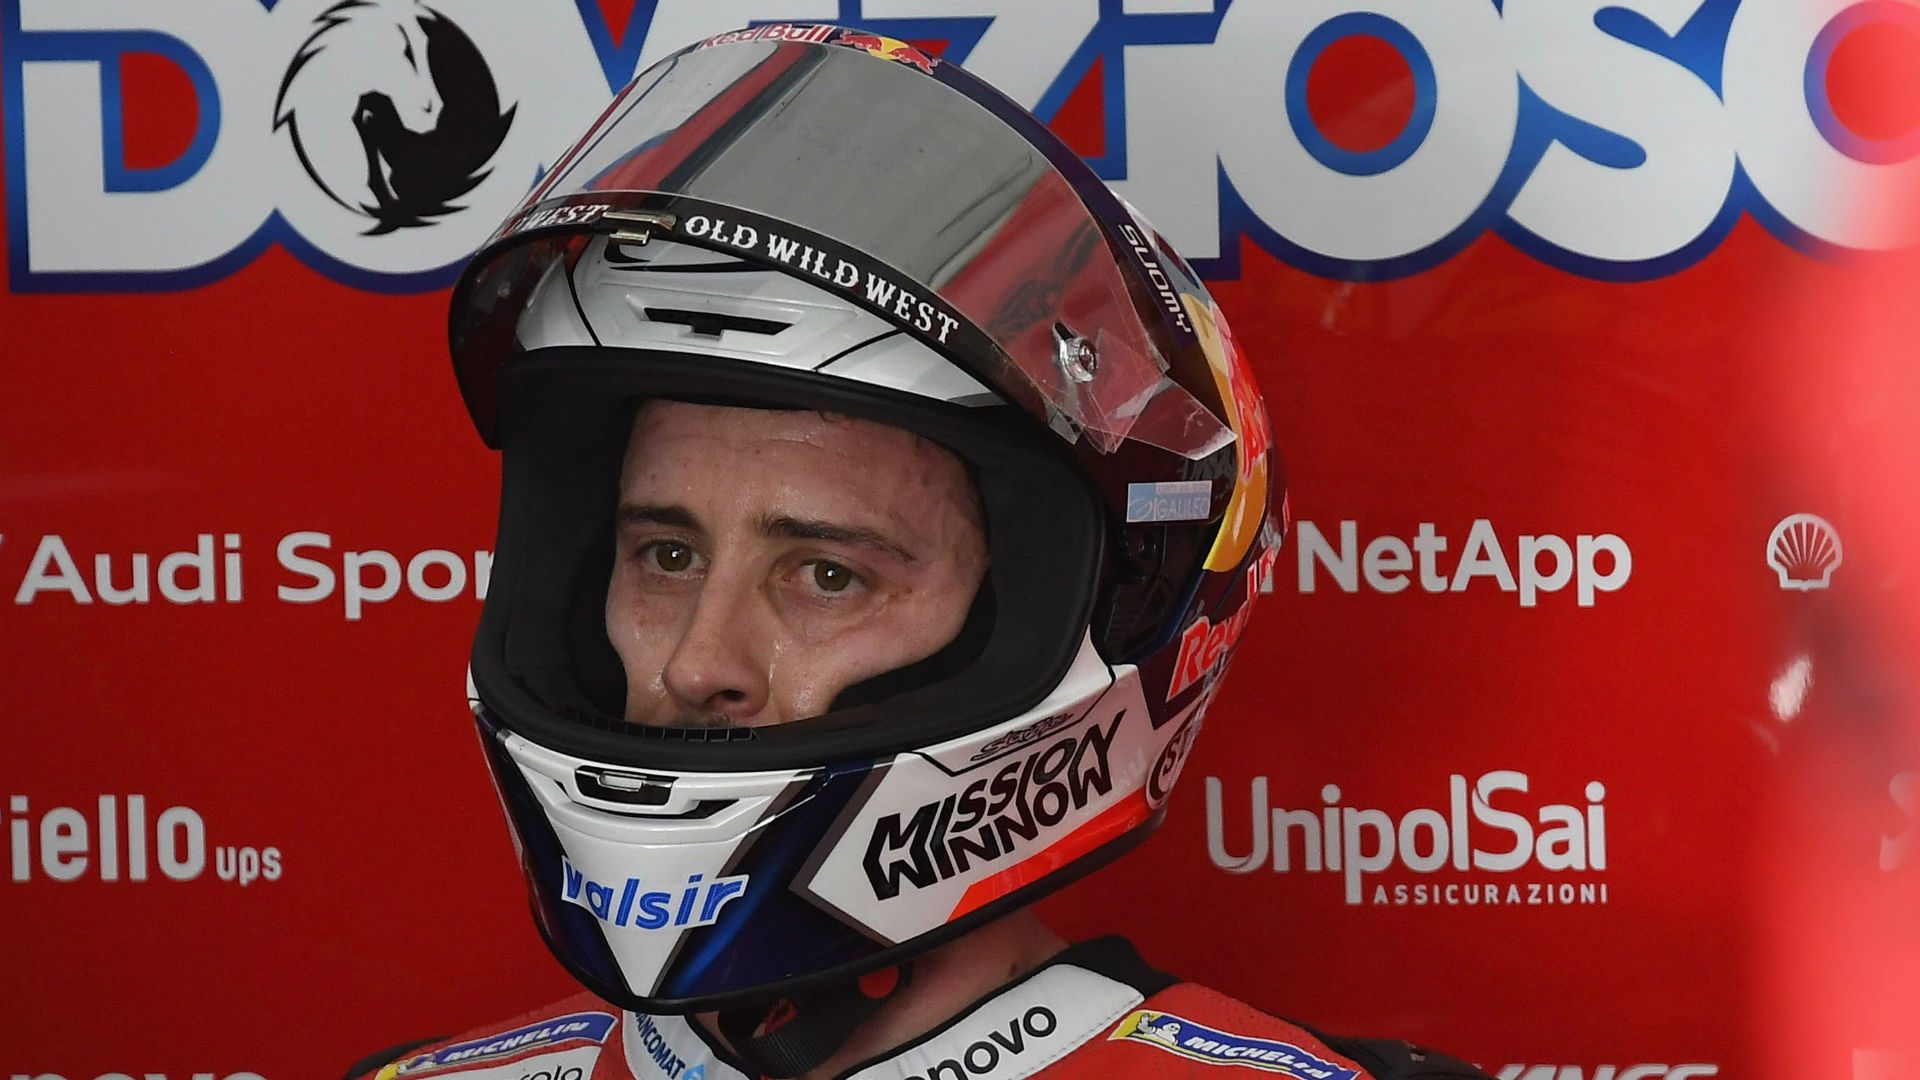 A motocross crash left Andrea Dovizioso requiring surgery, but the Ducati rider is sure he will be ready for the start of the MotoGP season.